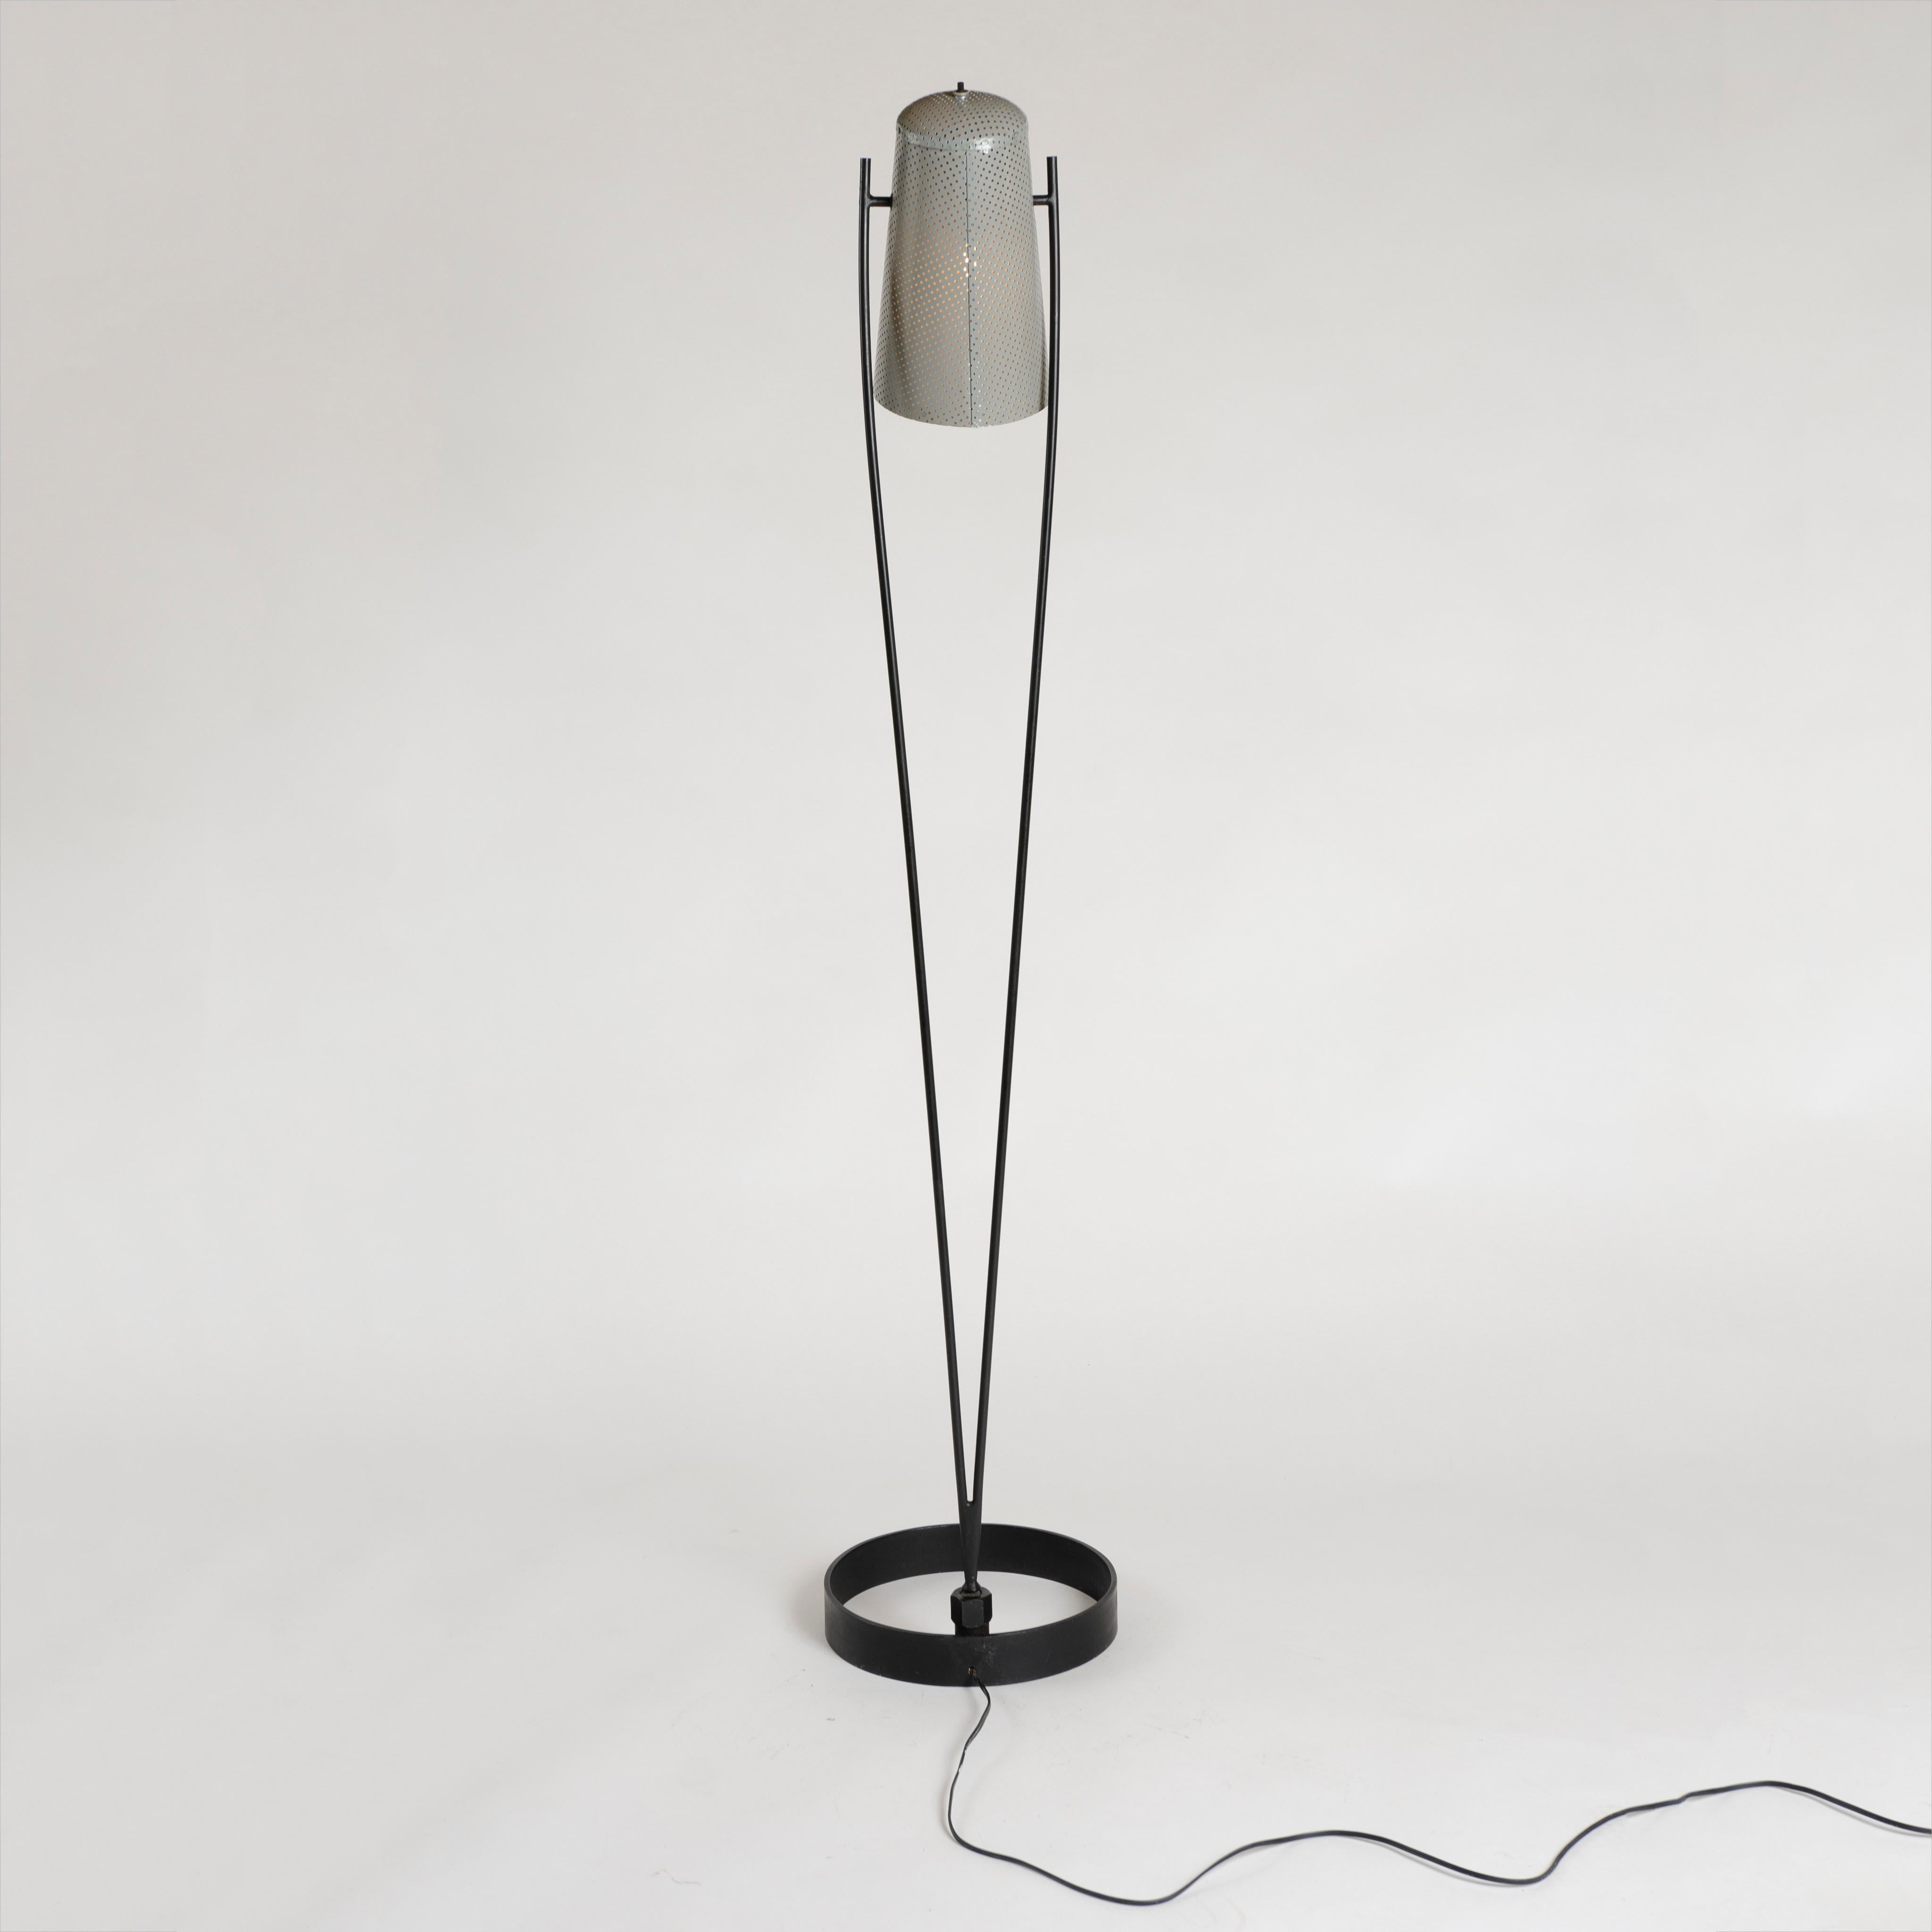 Aluminum 1950s Adjustable Perforated Floor Lamp by Ben Seibel for Raymor